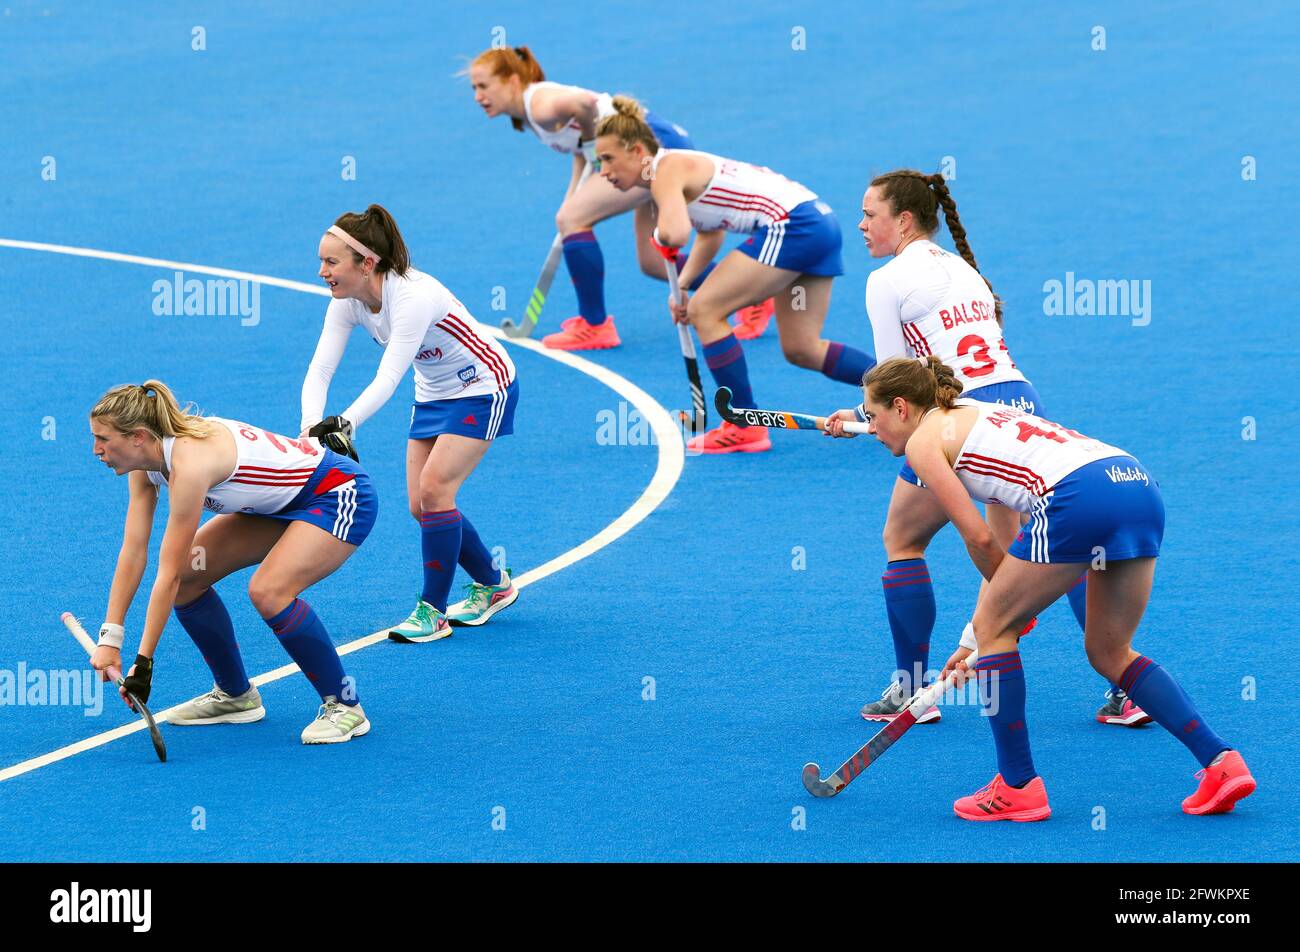 Great Britain's Lily Owsley, Great Britain's Laura Unsworth, Great Britain's Sarah Jones, Great Britain's Susannah Townsend, Great Britain's Grace Balsdon and Great Britain's Giselle Ansley (from left to right) prepare for a penalty corner during day two of the FIH Pro league match at Lee Valley Hockey and Tennis Centre. Picture date: Sunday May 23, 2021. Stock Photo